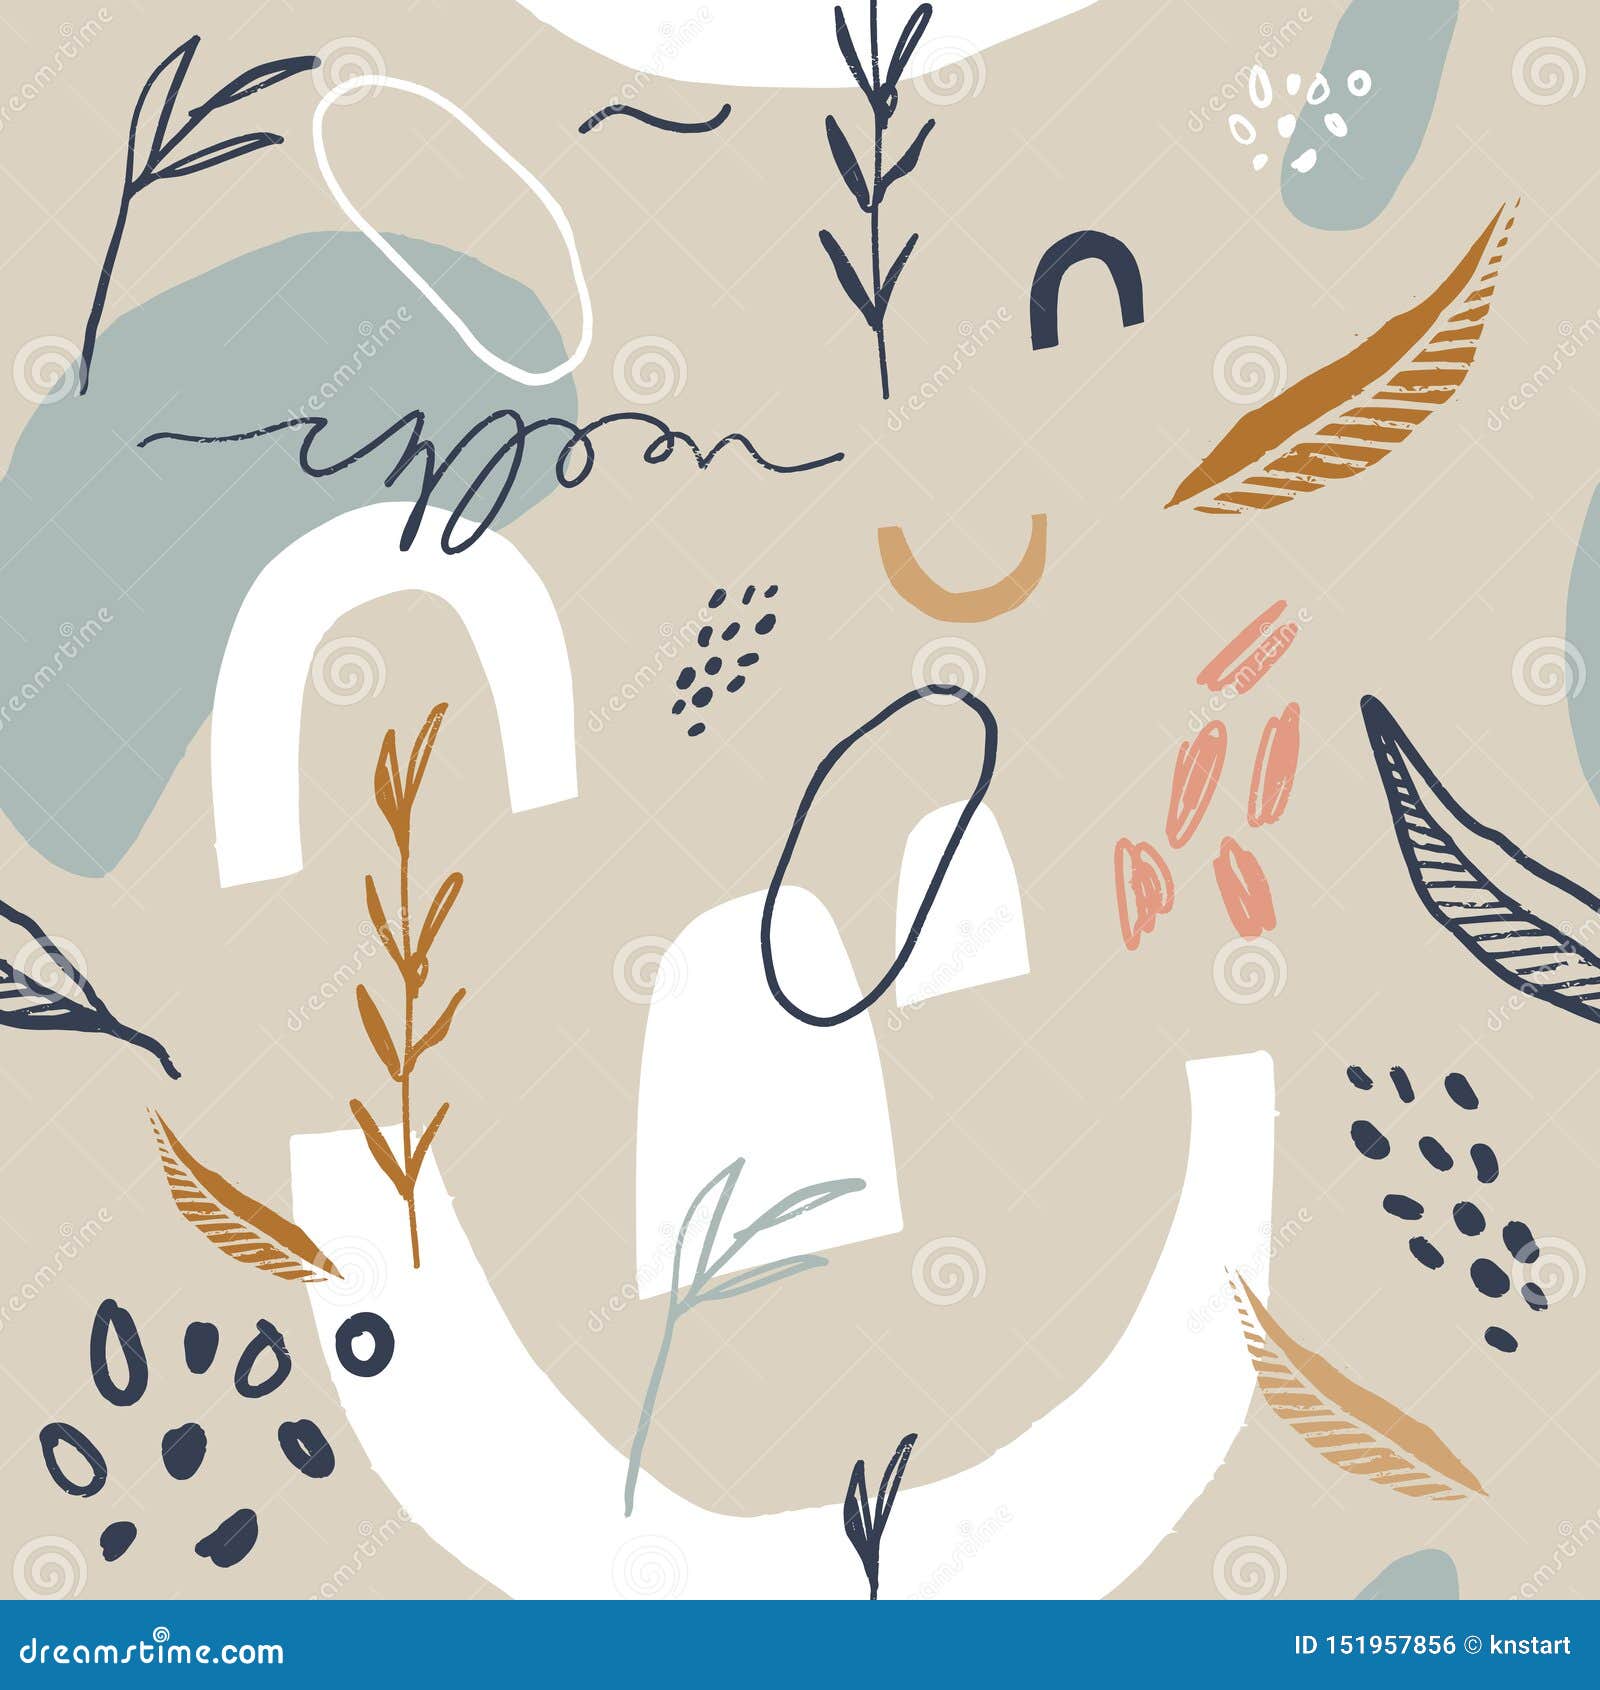 https://thumbs.dreamstime.com/z/abstract-spring-summer-seamless-pattern-shapes-leaves-light-pastel-beige-white-color-background-aesthetic-greeting-151957856.jpg